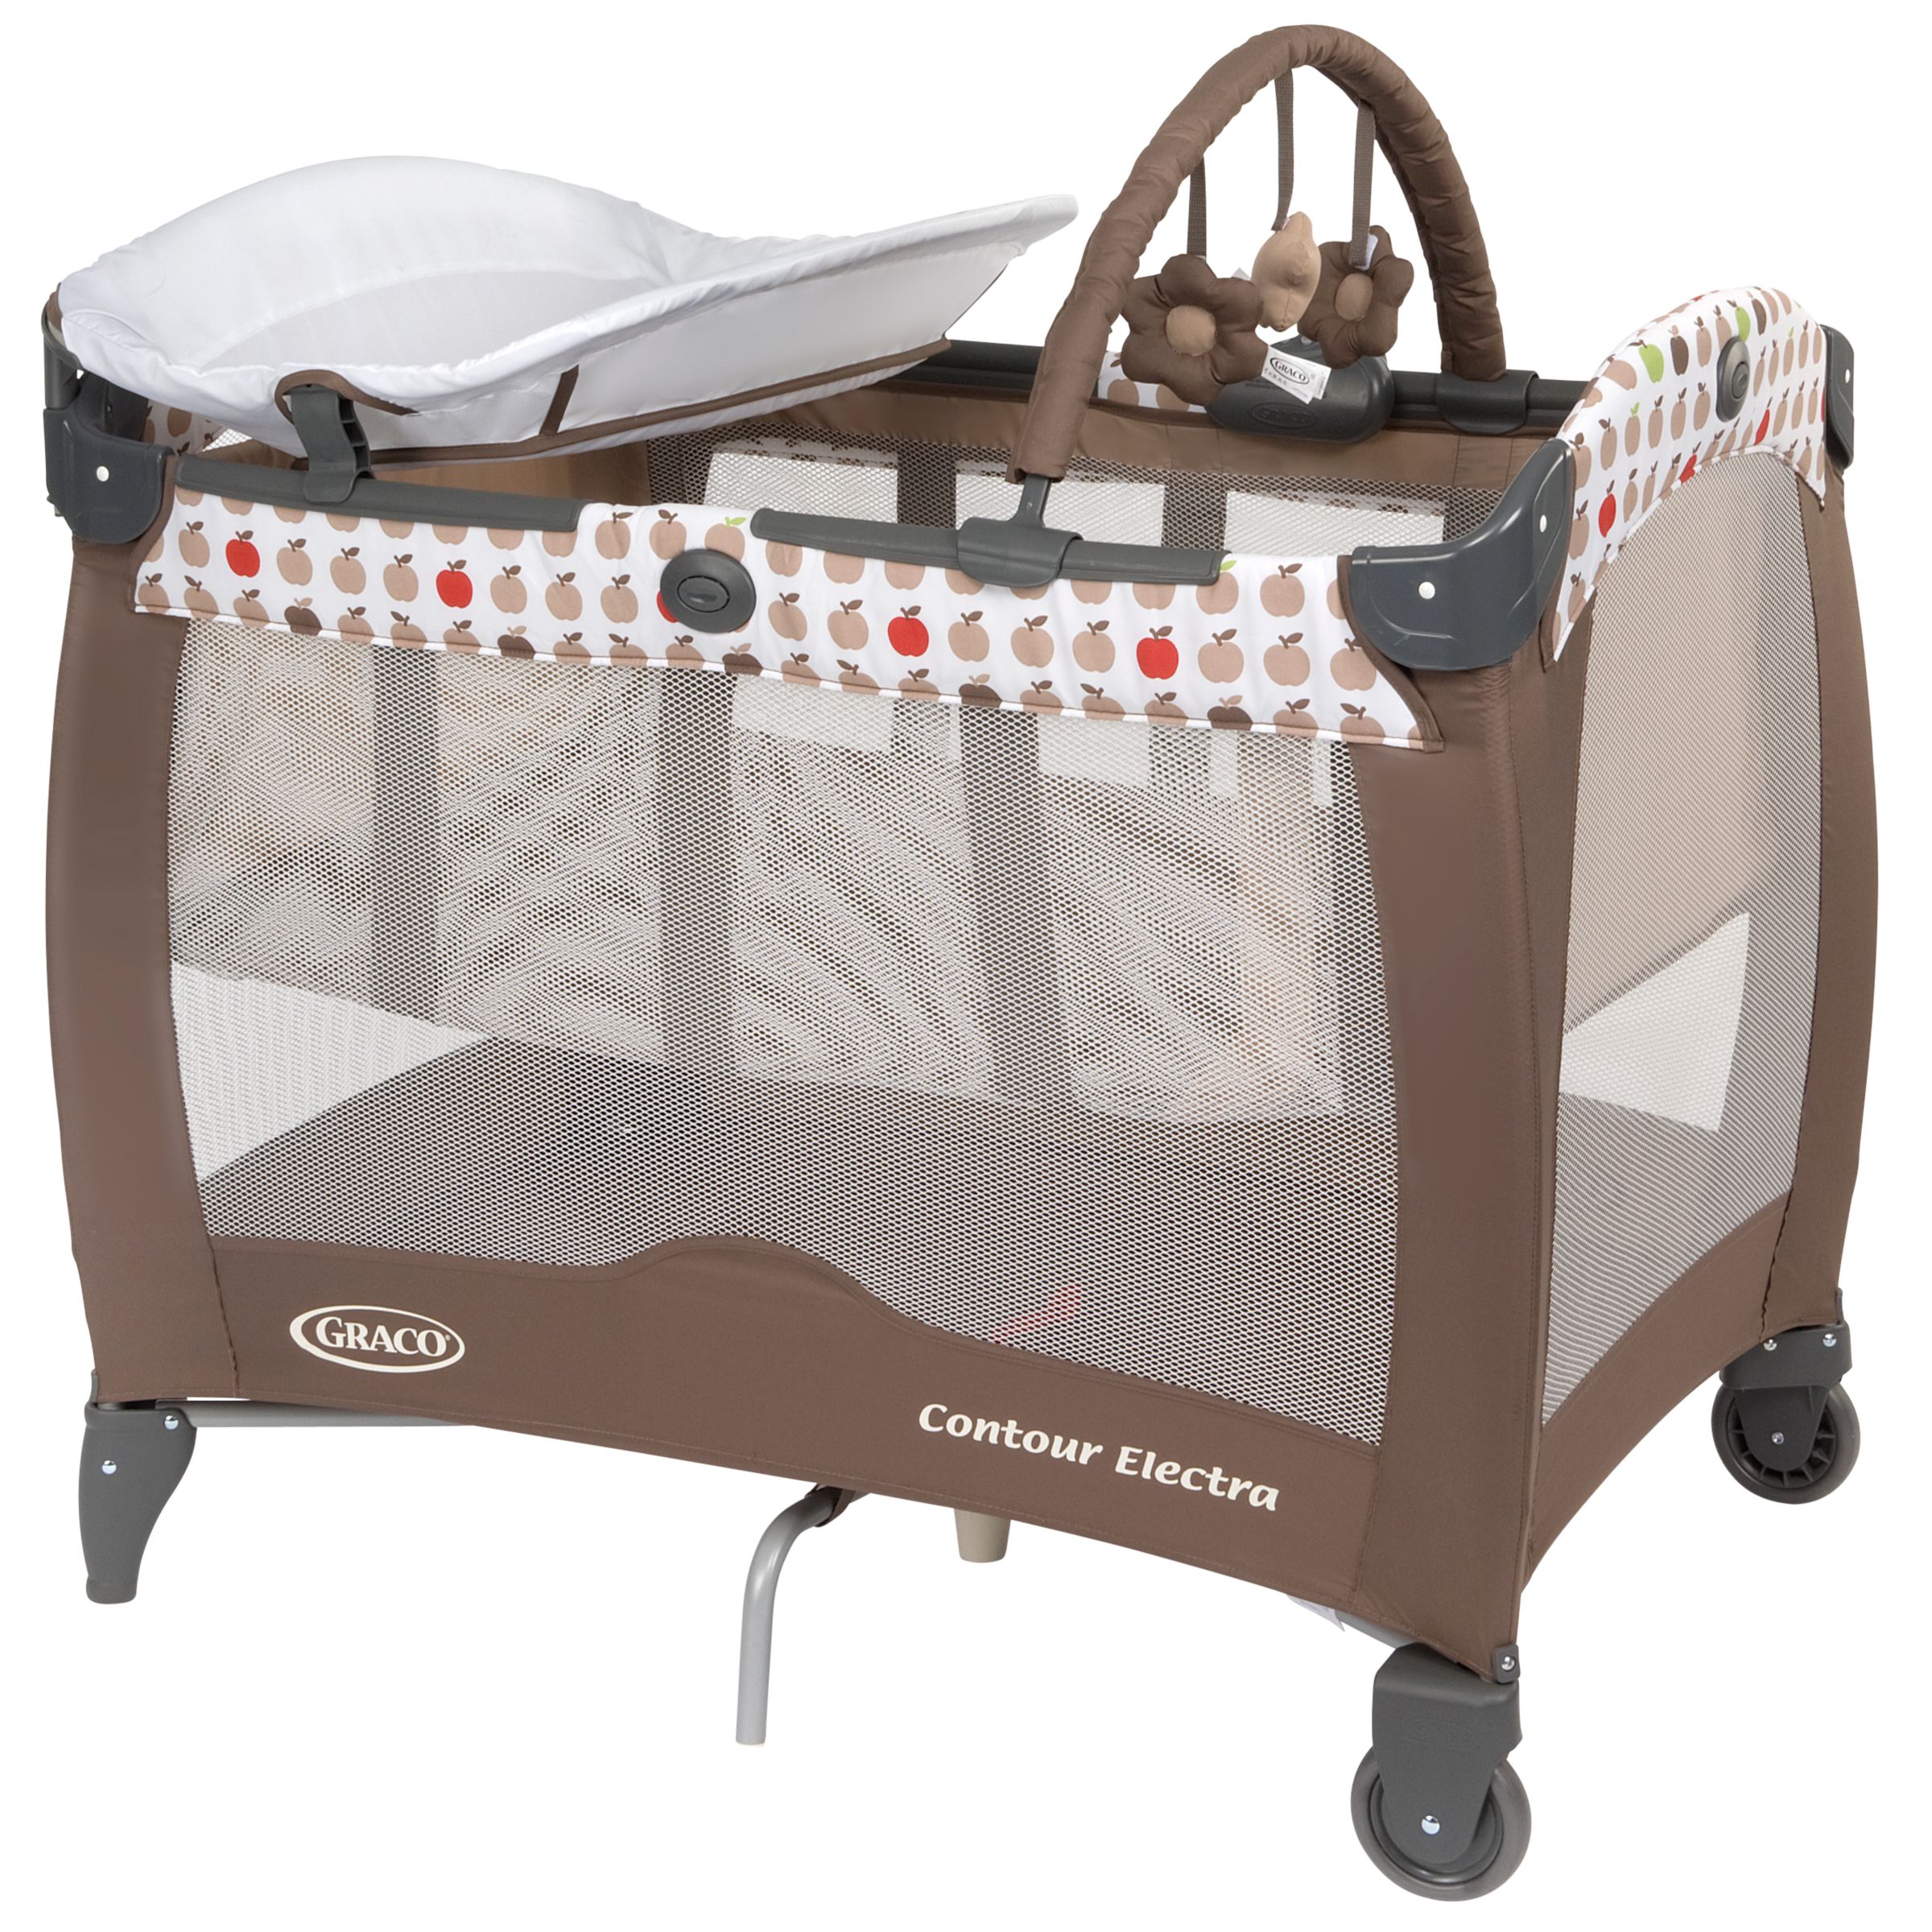 Electra Travel Cot, Apples